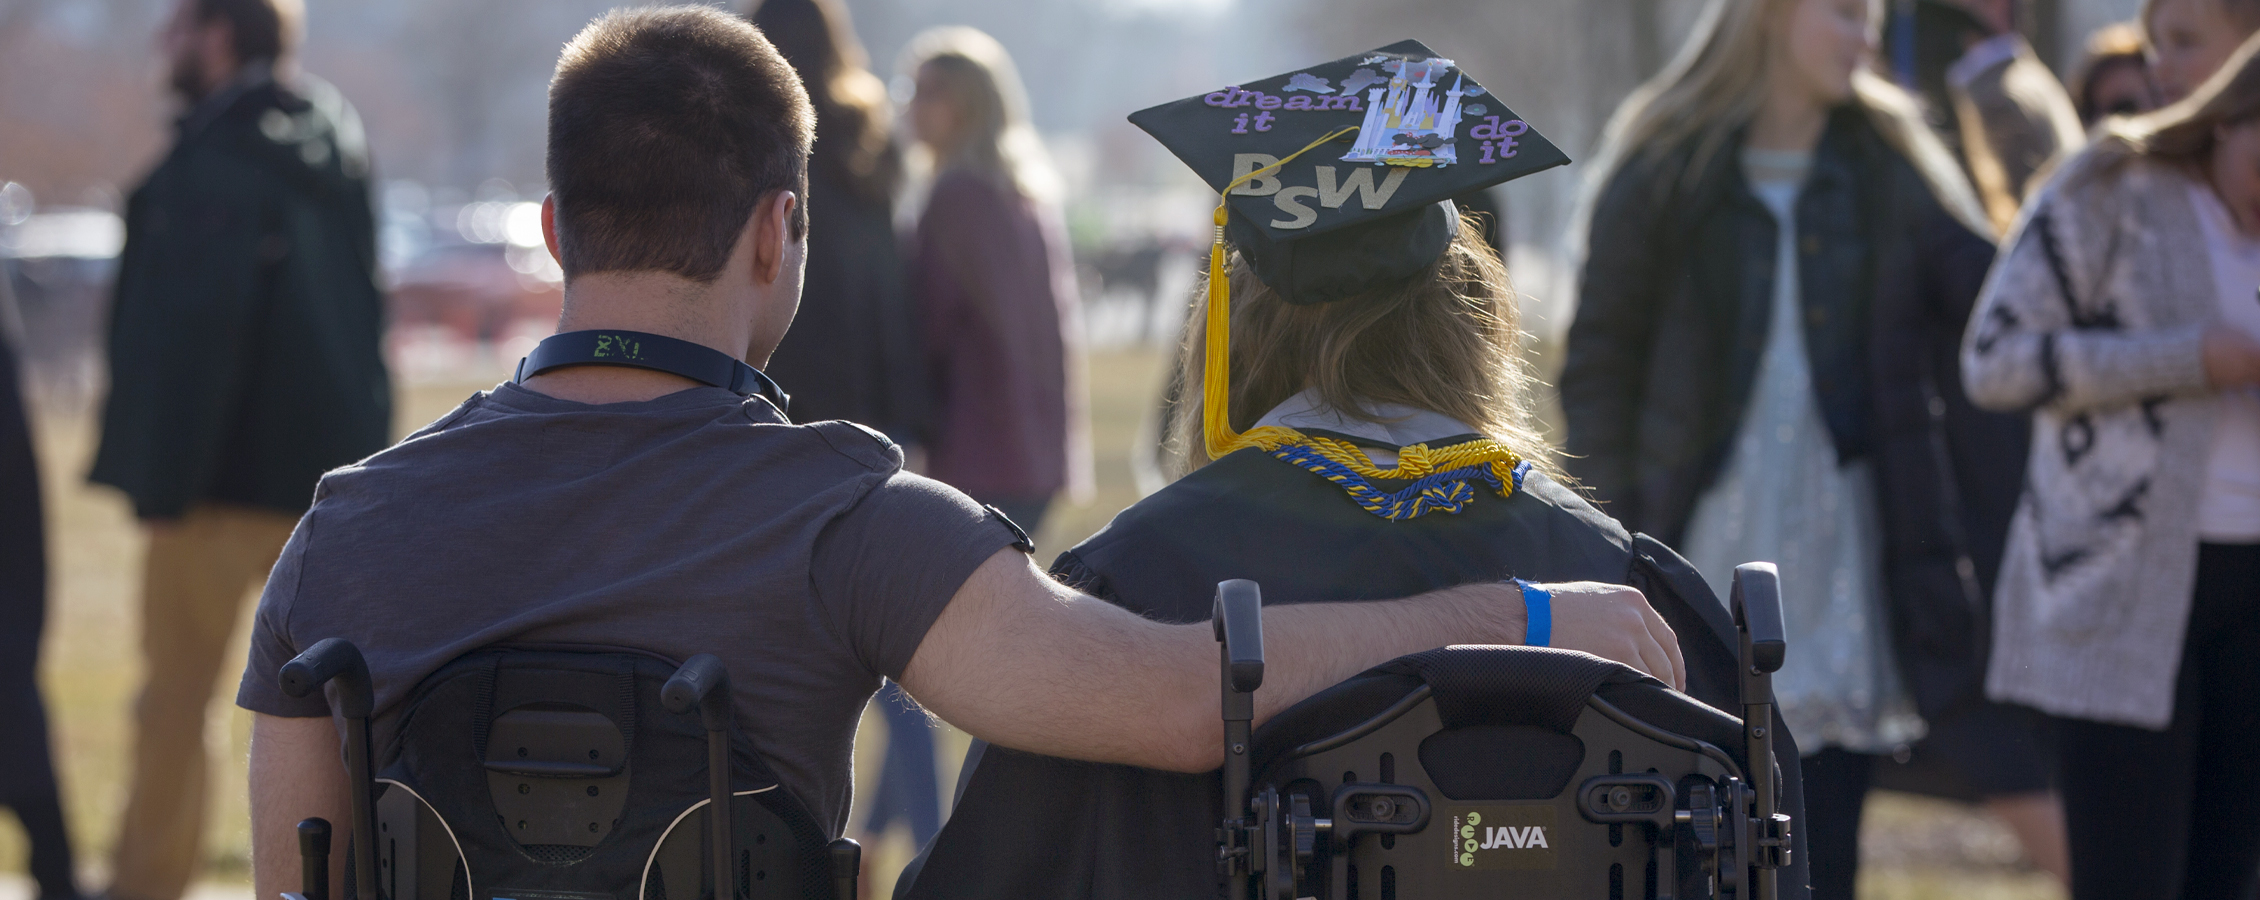 Two people in wheelchairs with their arms around each other at graduation.